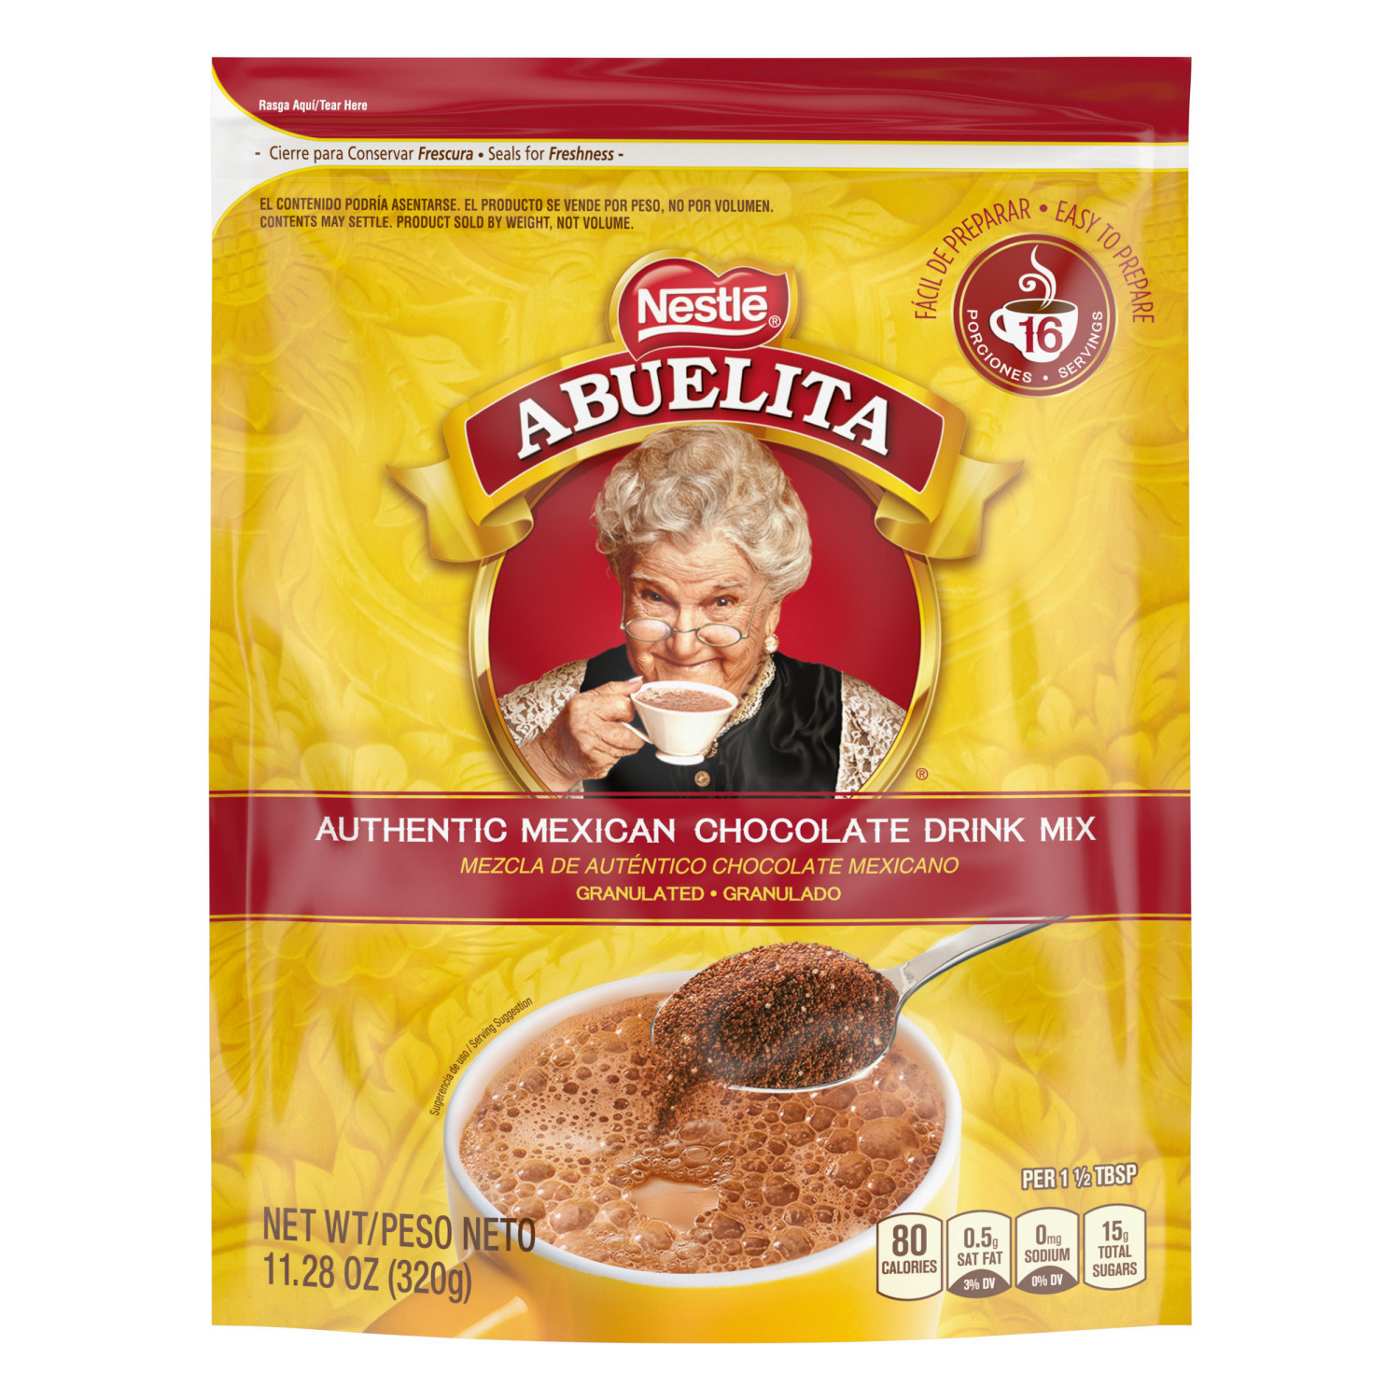 Nestle Abuelita Authentic Mexican Hot Chocolate Granulated Mix; image 1 of 7